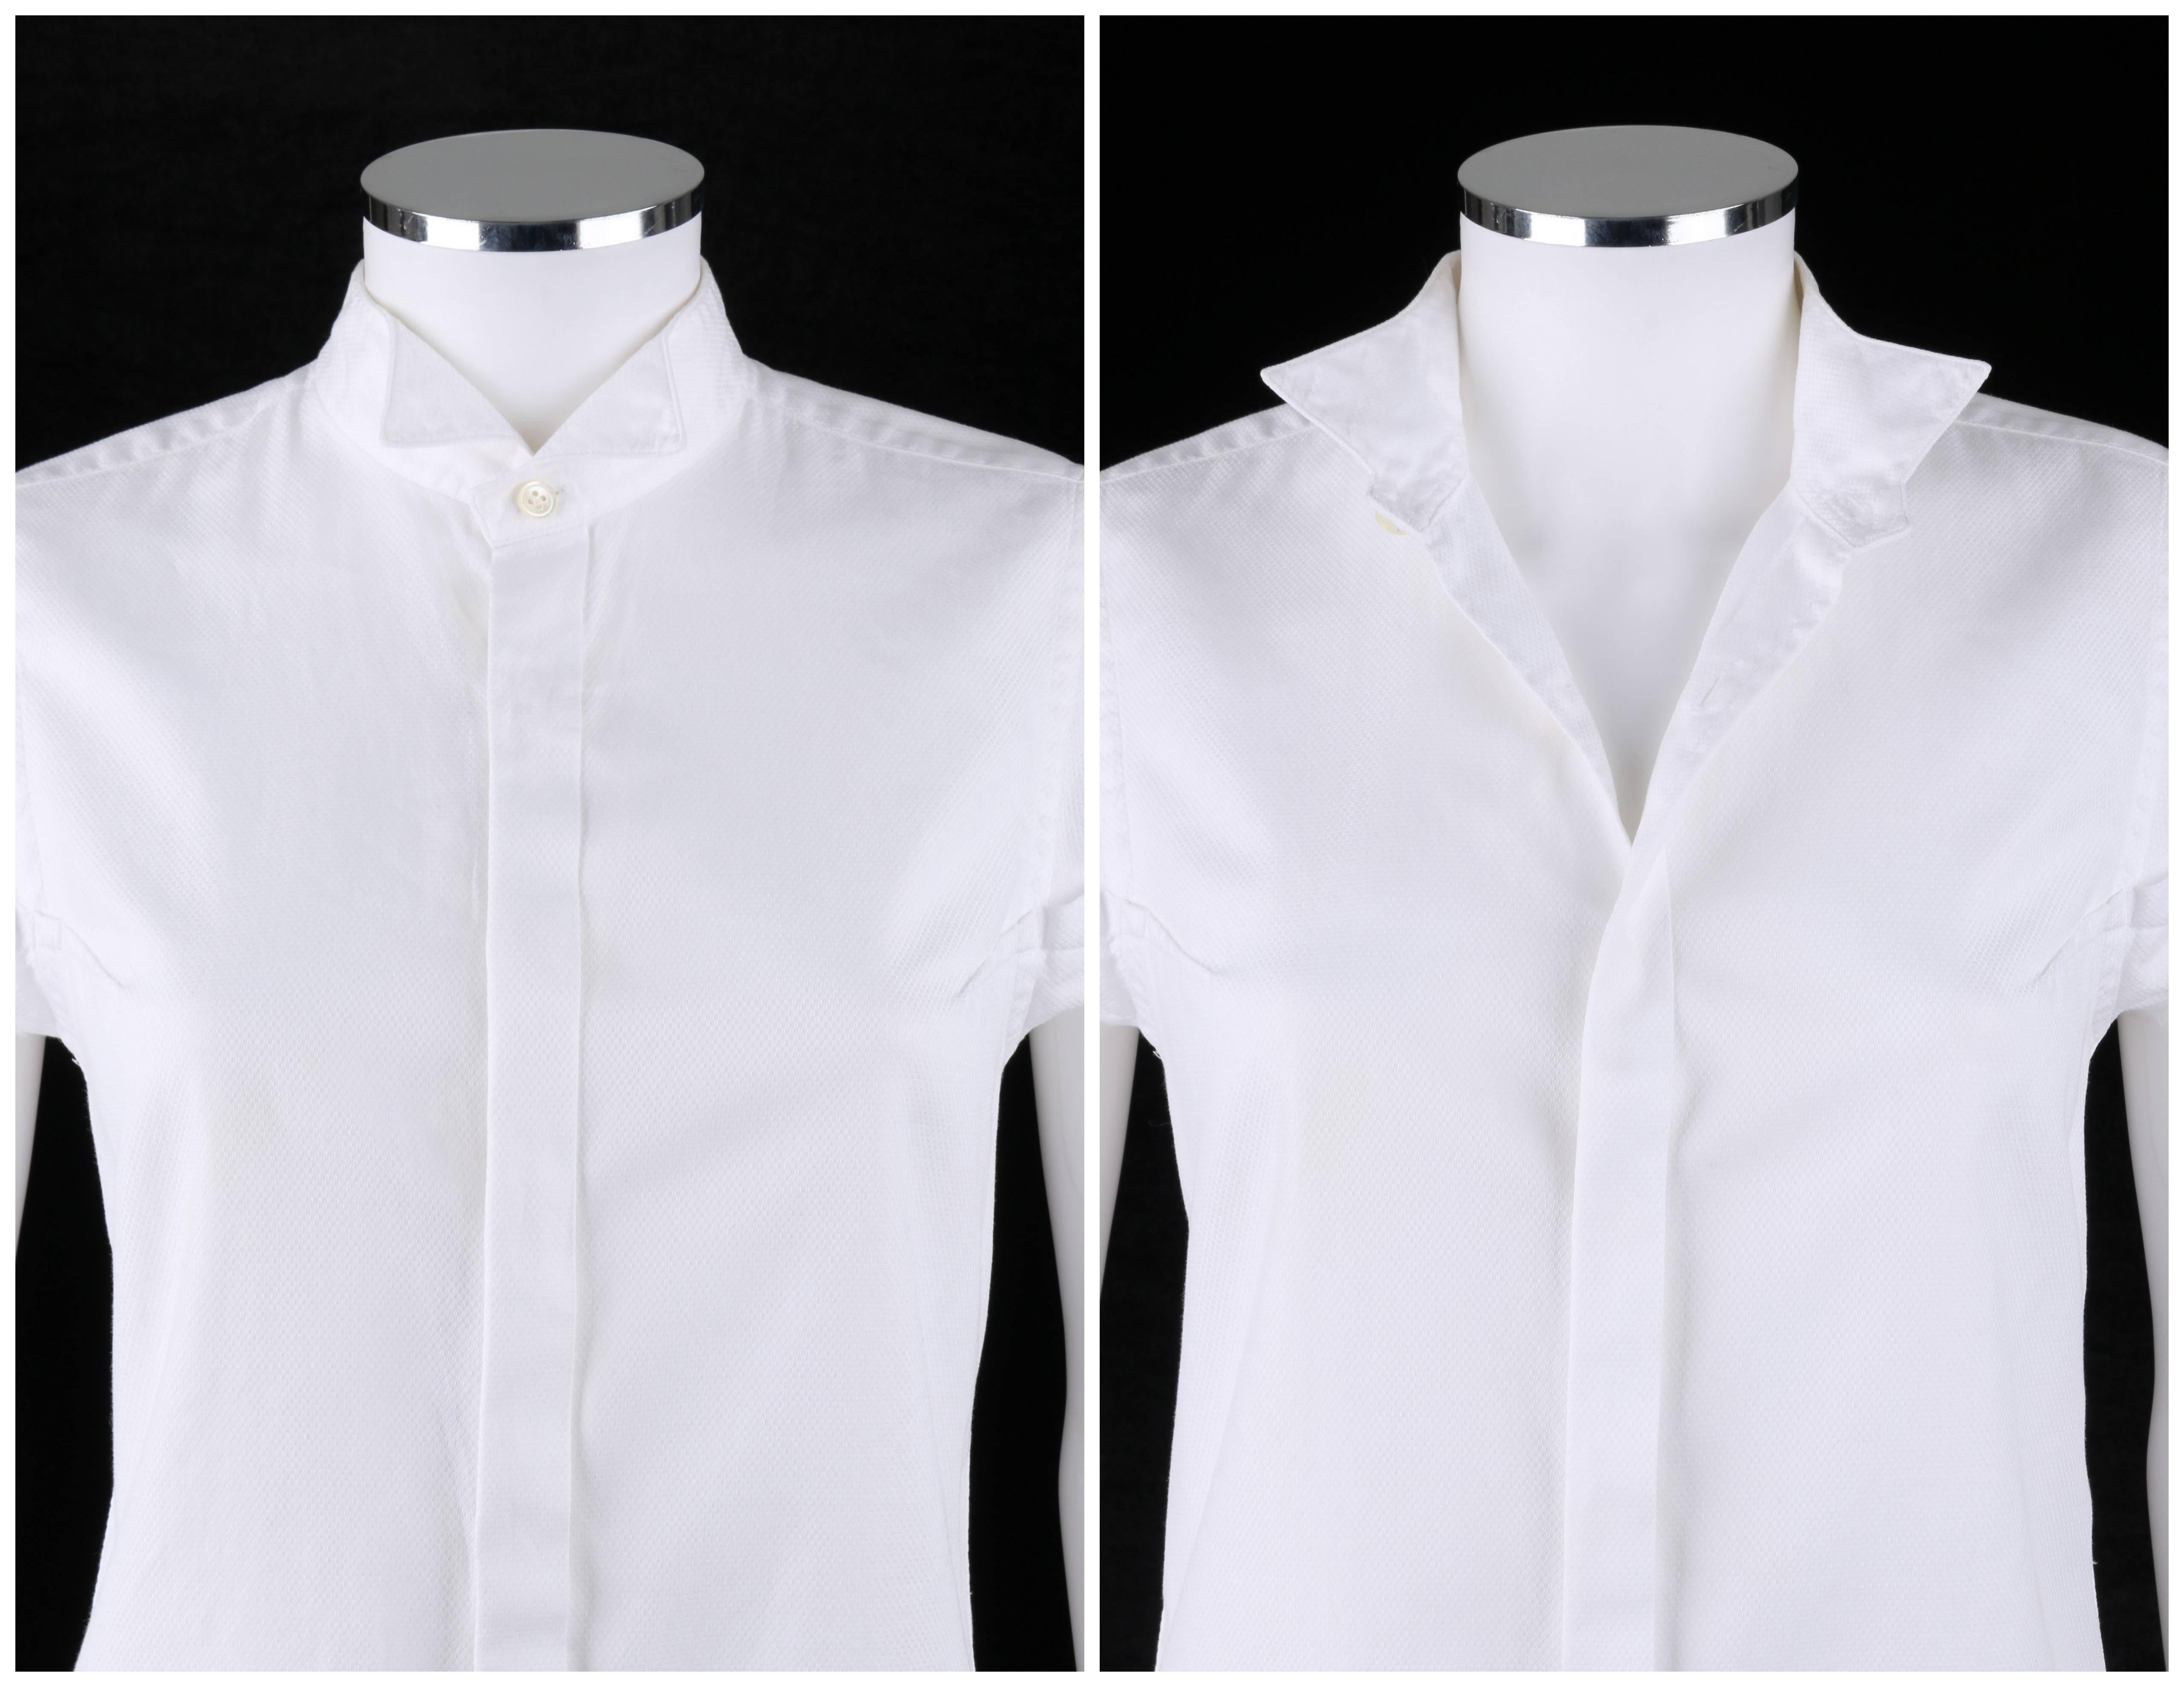 Comme des Garcons white cotton pique button front tuxedo shirt designed by Junya Wantanabe. Cap sleeves with raw edge detail. Seven front hidden button closures. Standing winged collar (can be worn up or folded down). Exposed bust darts. Back yoke